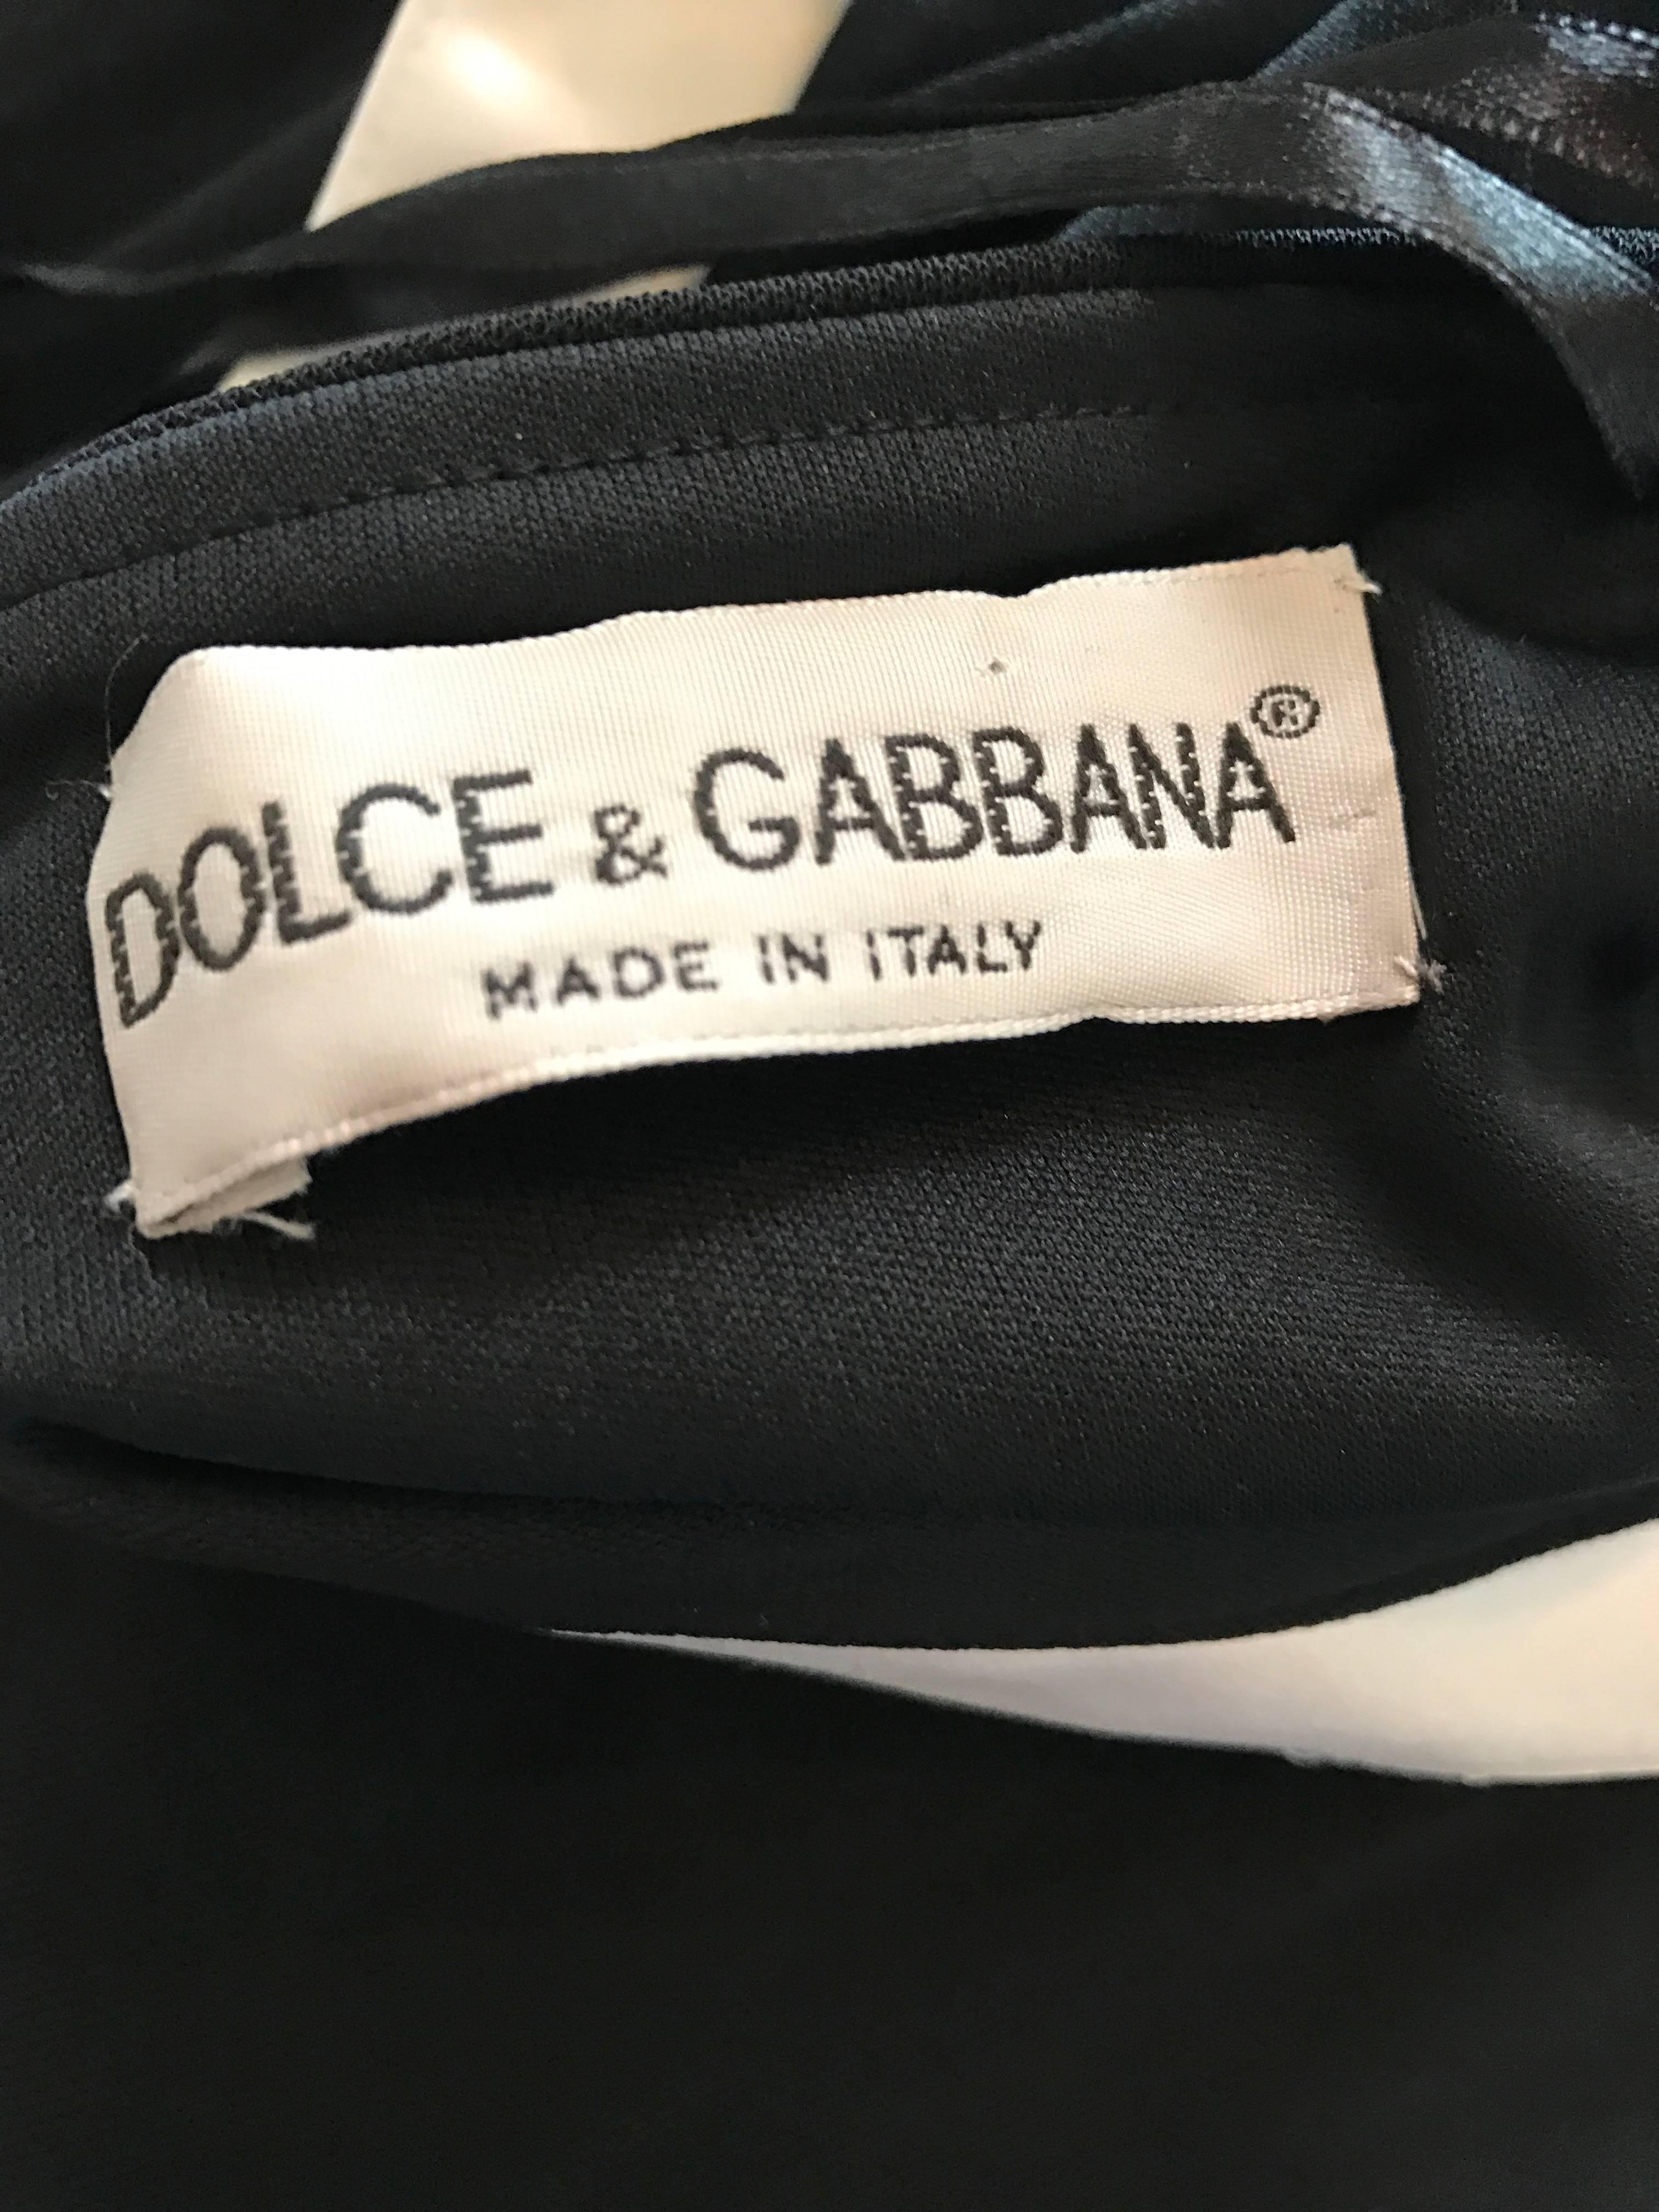 Dolce & Gabbana 1990s Vintage Black and White Iconic Jersey Dress Gown Dress For Sale 5